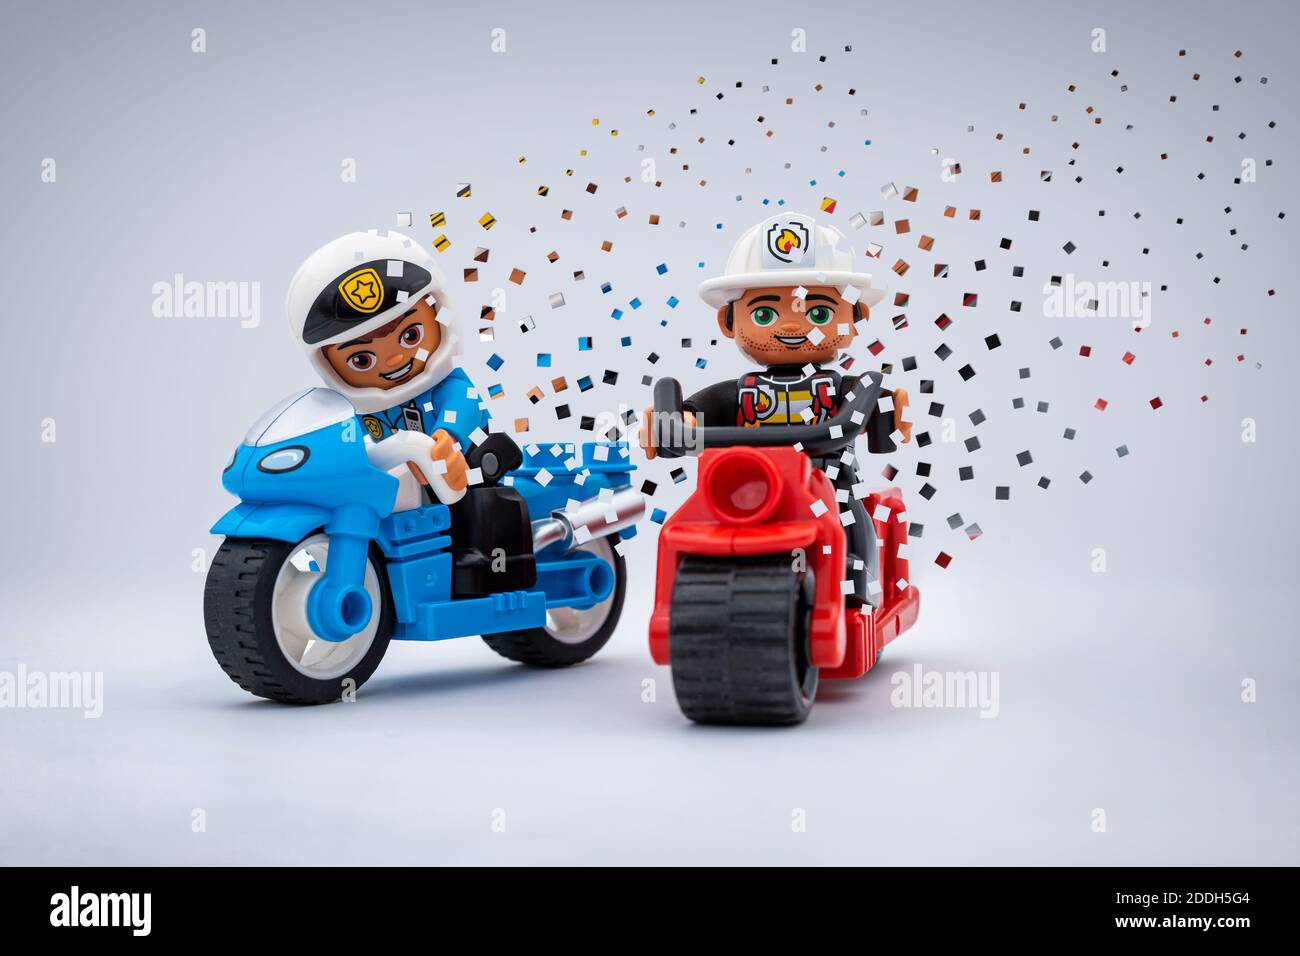 two Lego minifigures motorbikers with a pixelated disintegration effect. A police officer on a blue motorbike and a fireman on a red one. Stock Photo